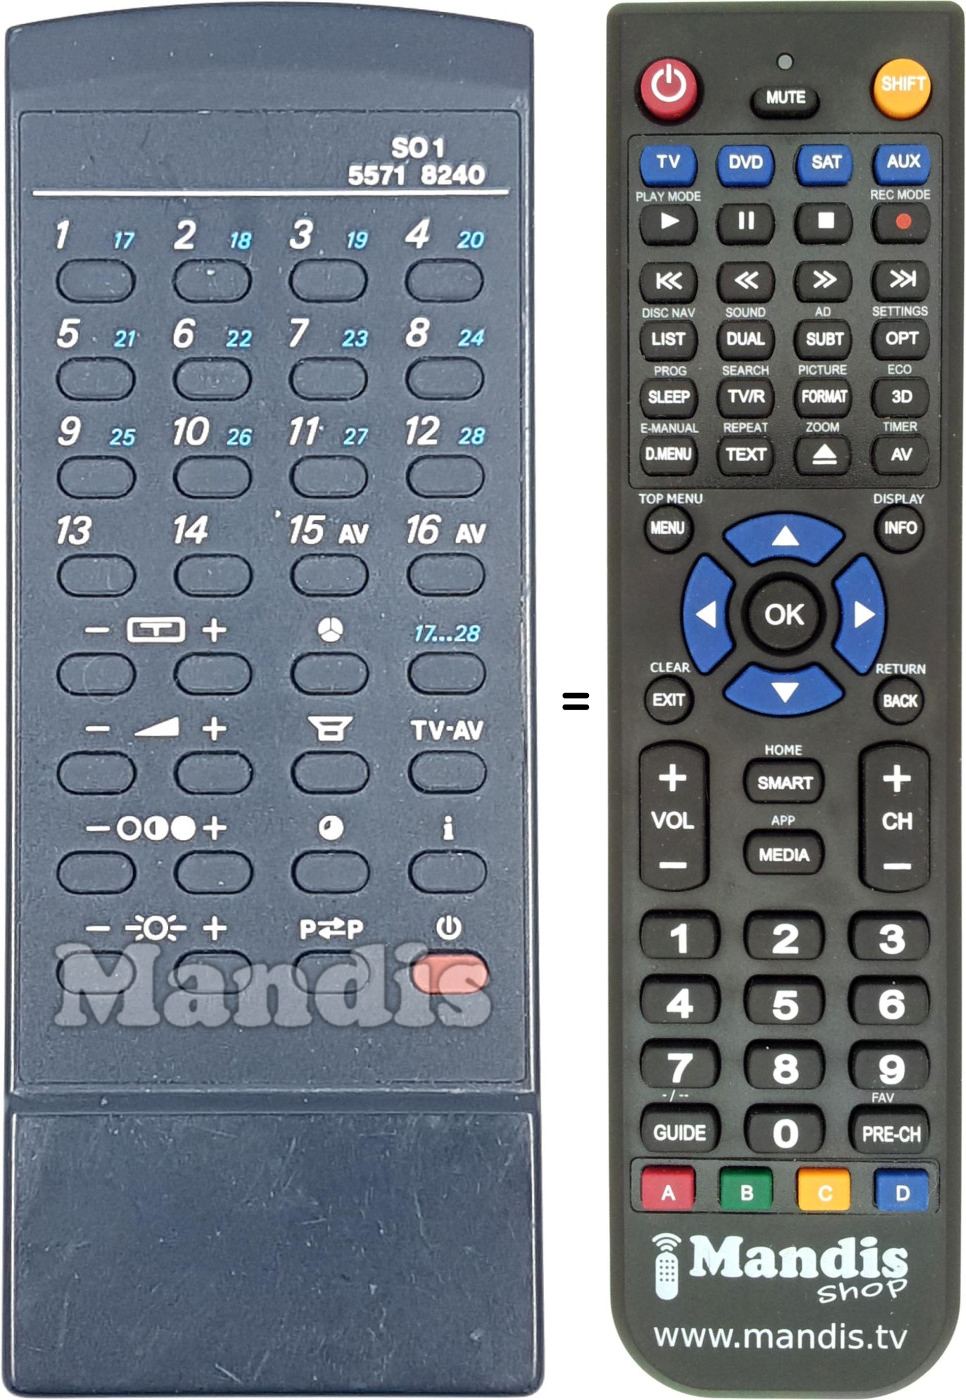 Replacement remote control 55718240